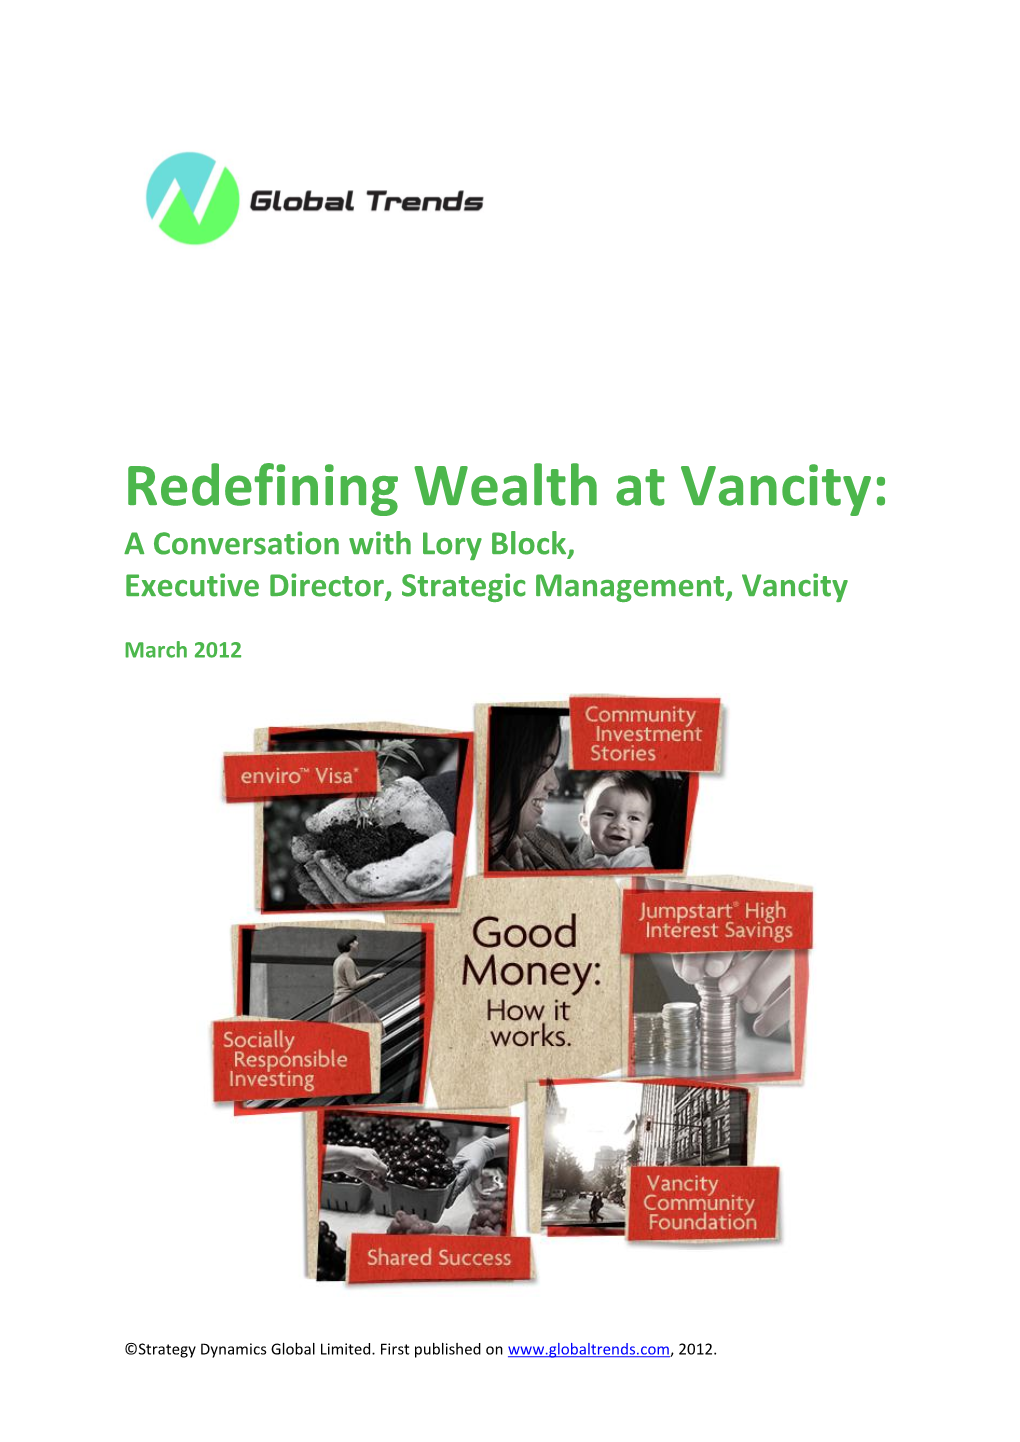 Redefining Wealth at Vancity: a Conversation with Lory Block, Executive Director, Strategic Management, Vancity